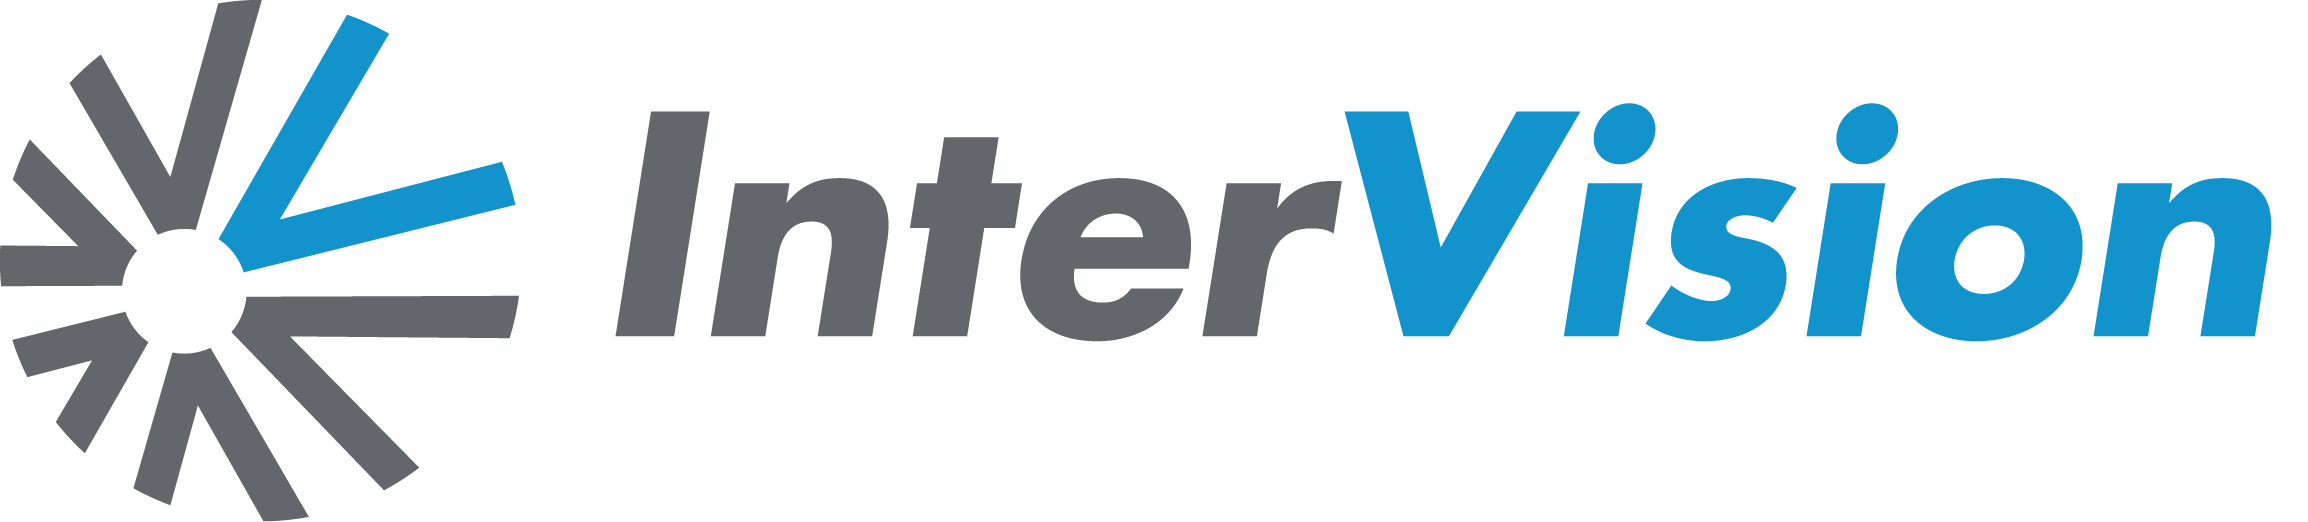 New Logo - Intervision.png